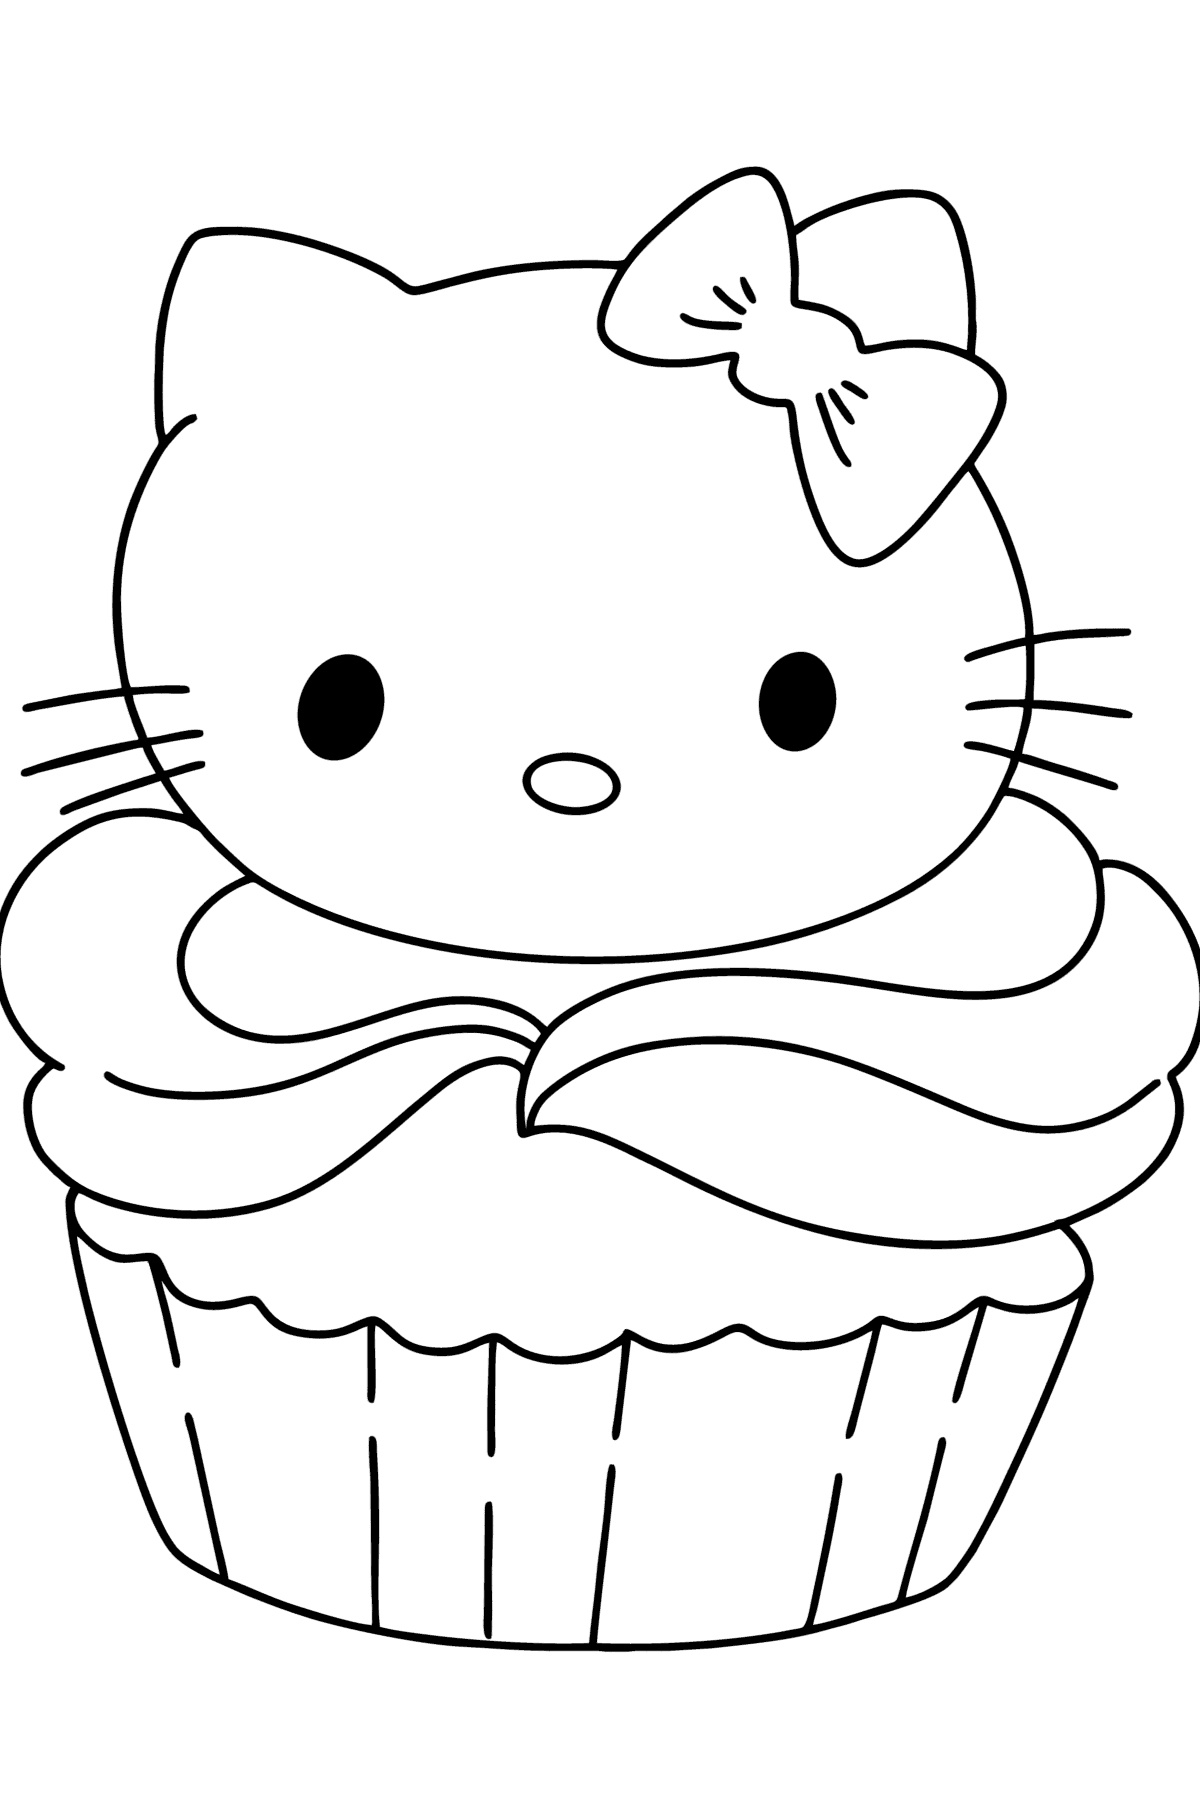 Hello Kitty cupcake coloring page - Coloring Pages for Kids